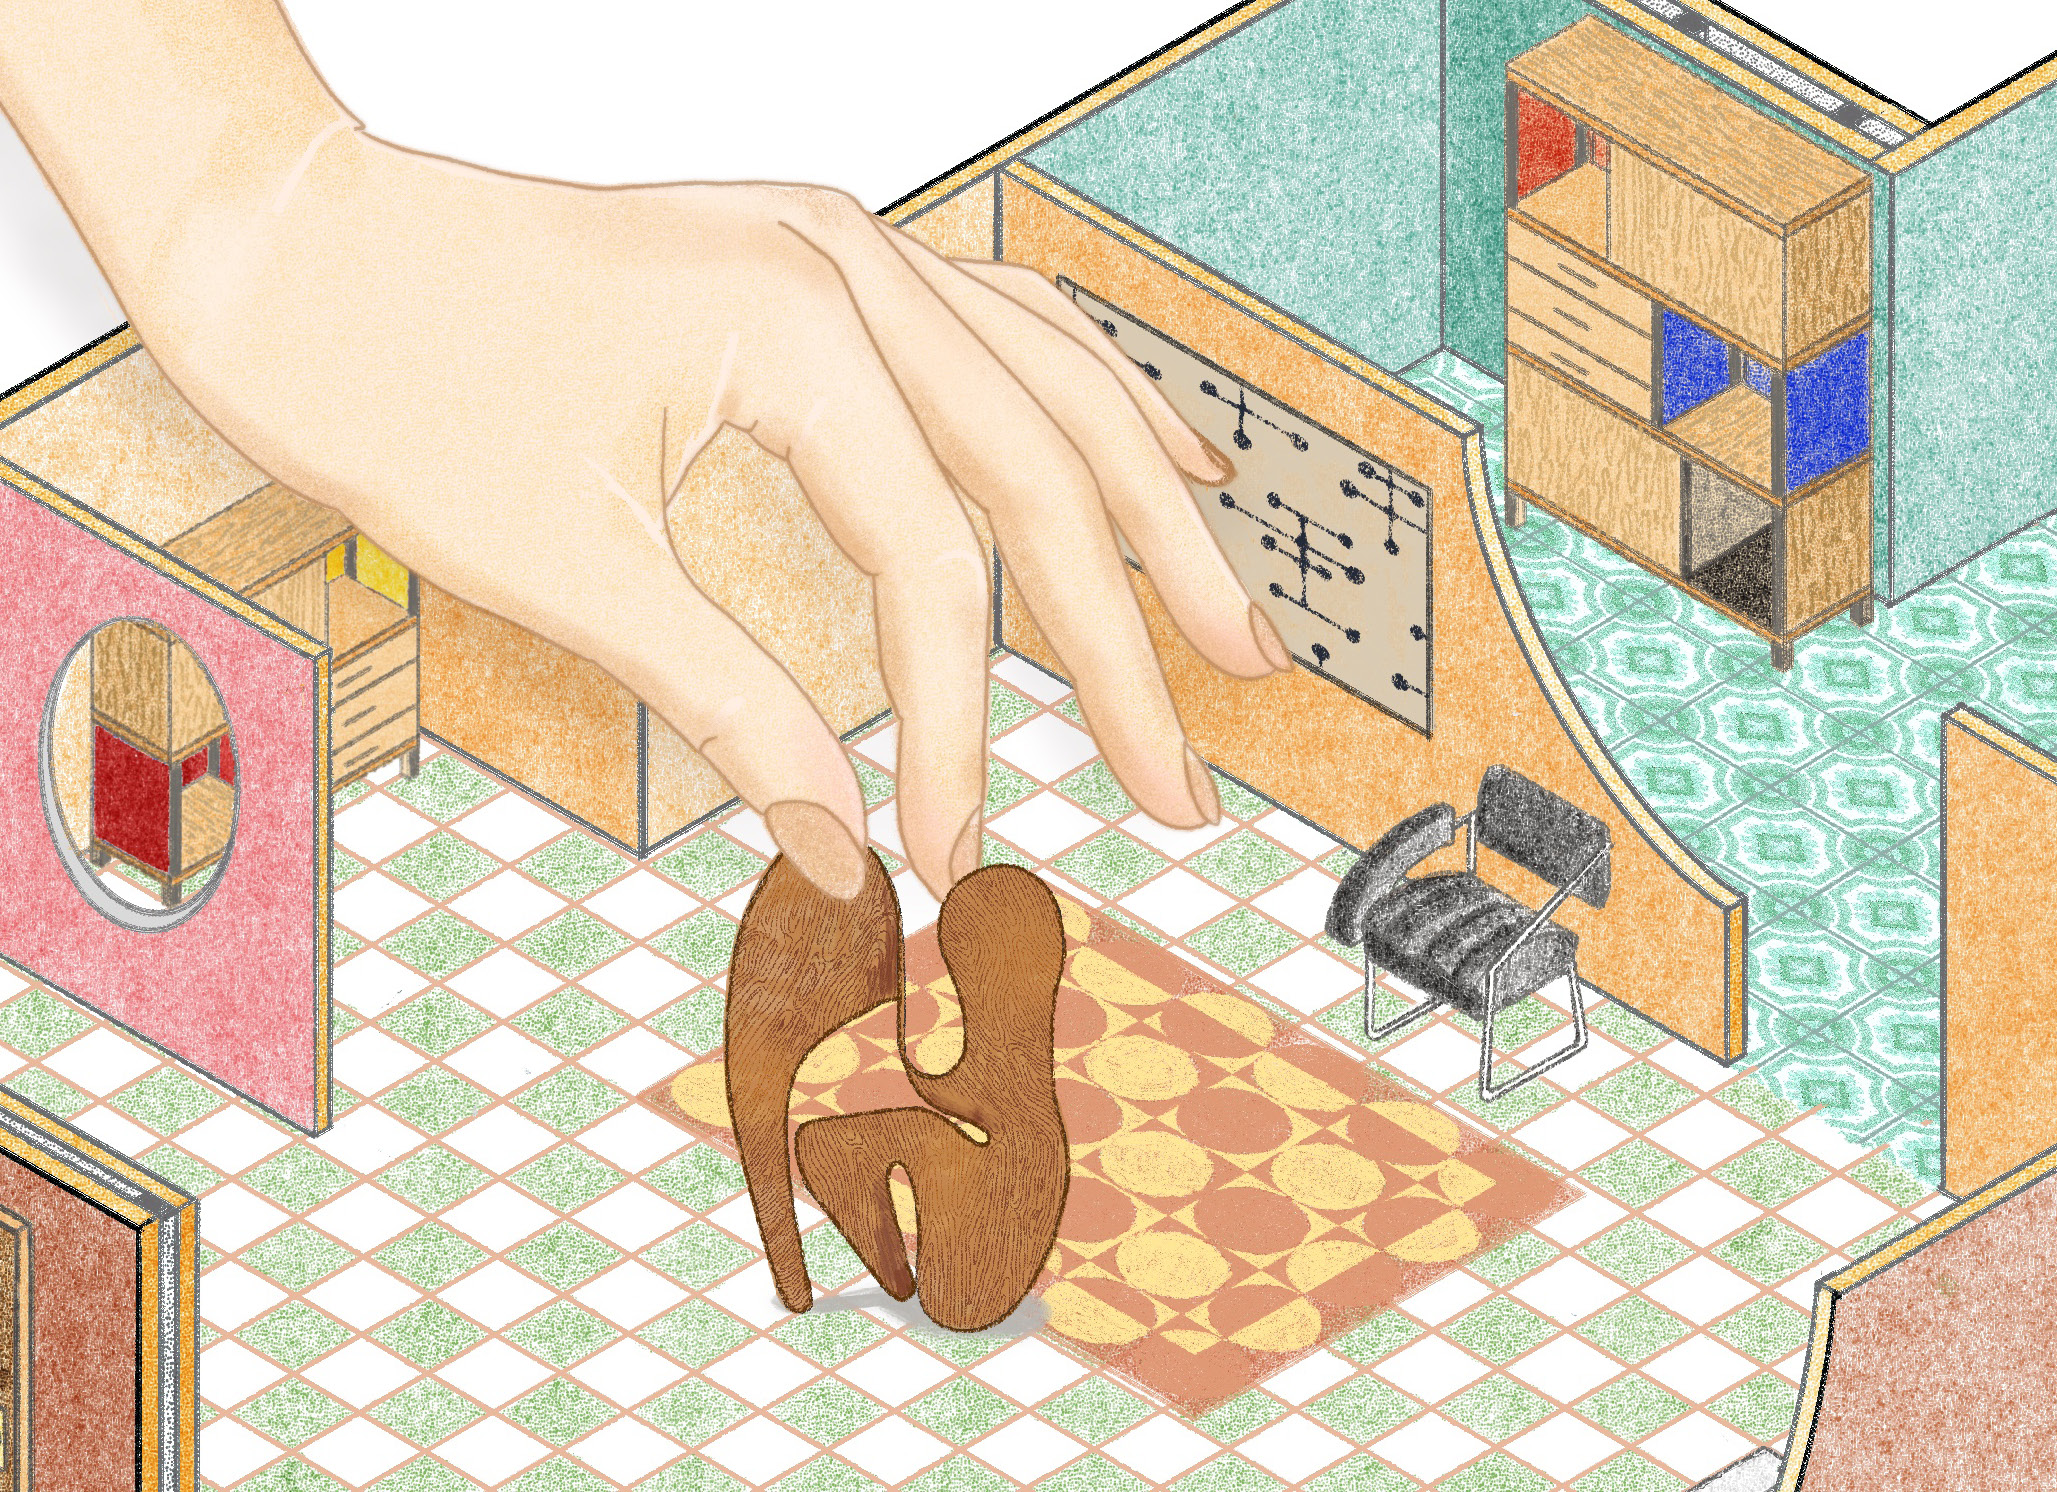 illustration of a white hand placing wooden furniture inside an interior model